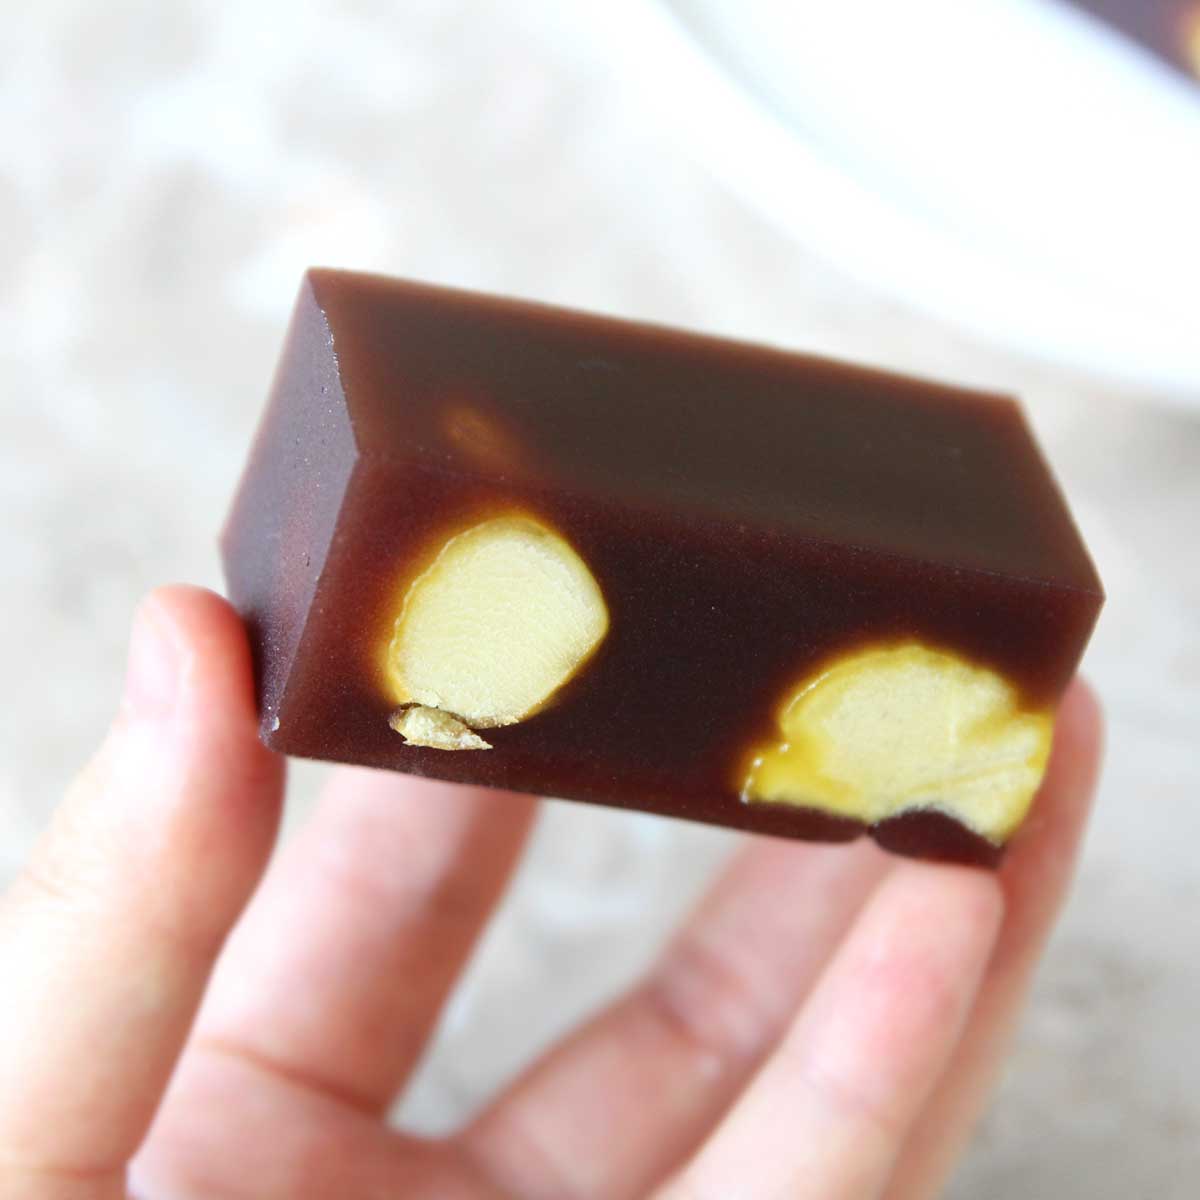 How to Make the Japanese Wagashi - Neri Yokan with Chestnuts - Bean Paste Cookies